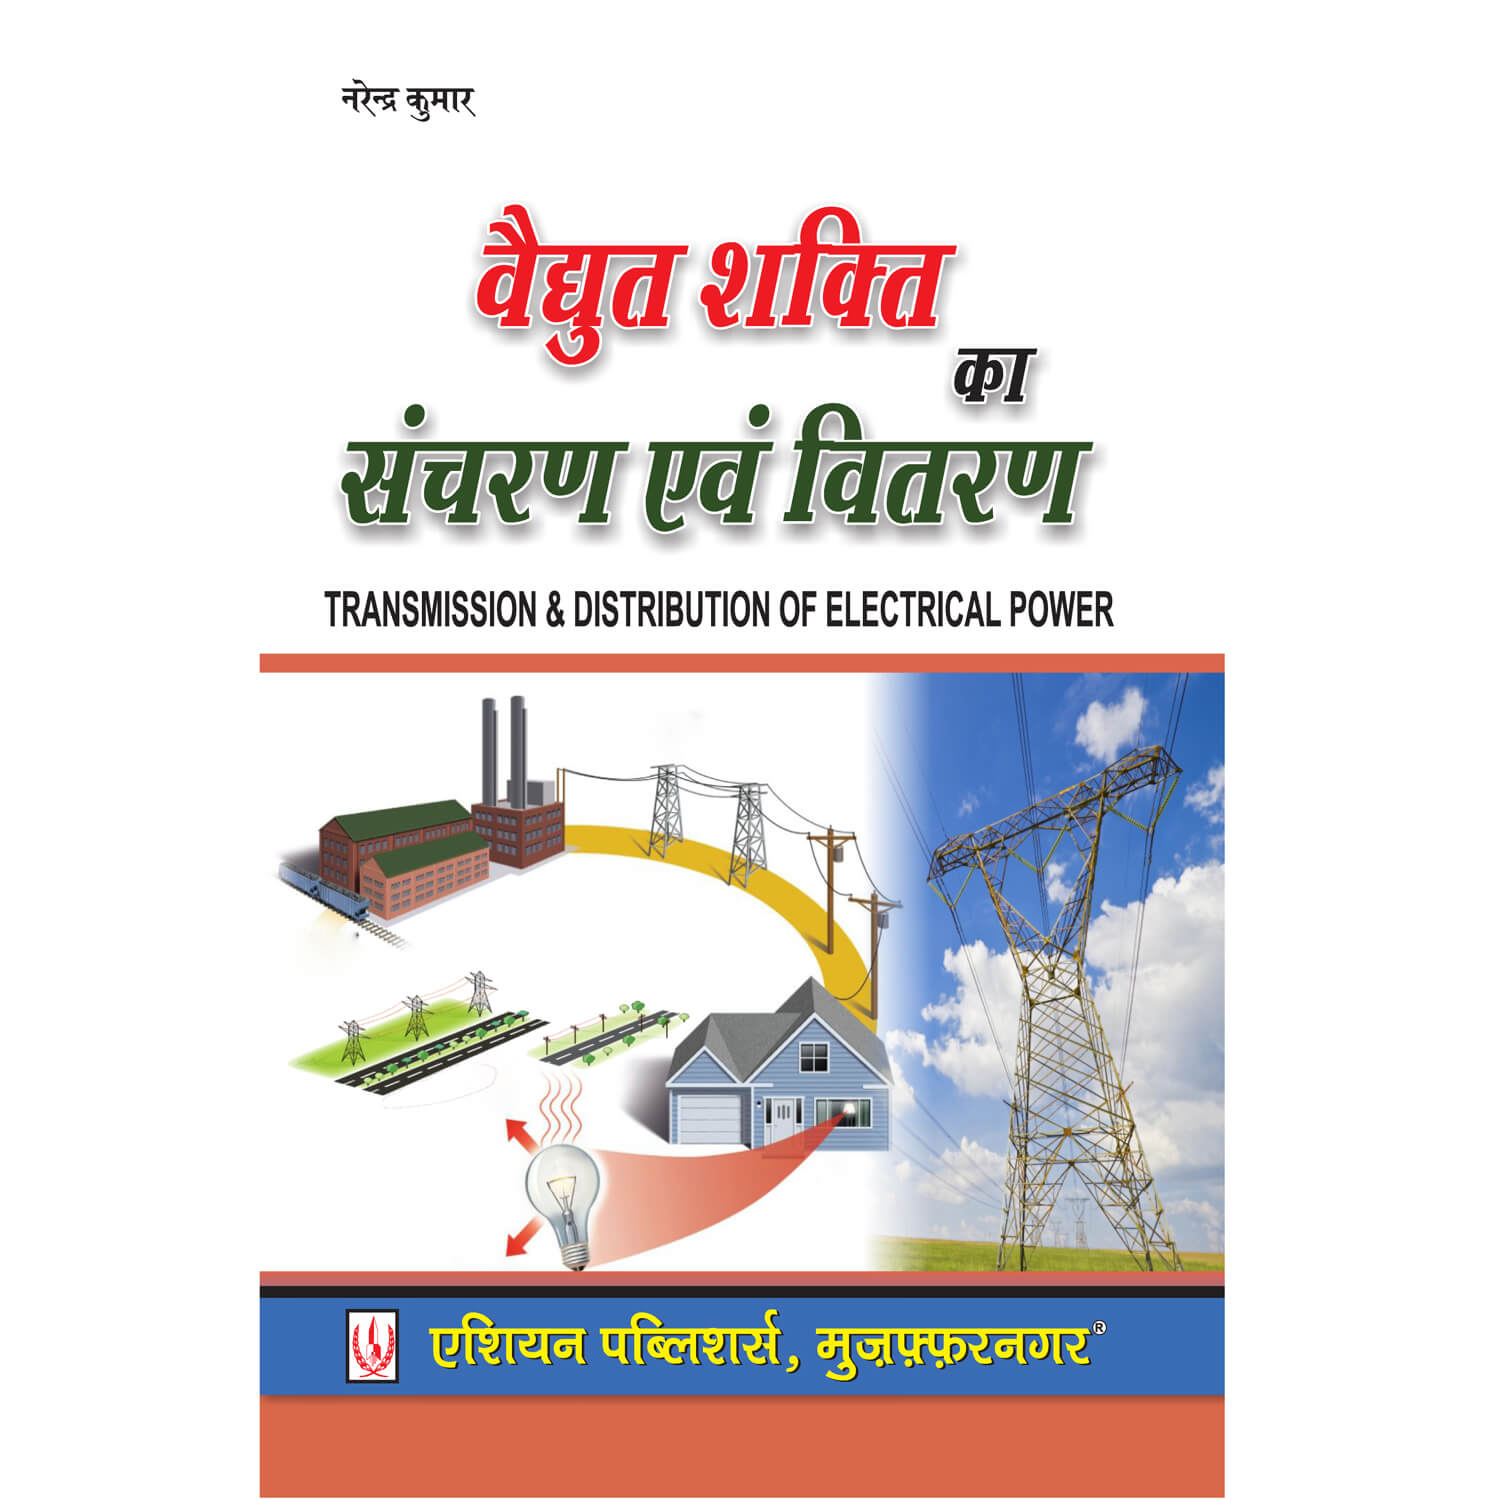 Transmission and Distribution of Electrical Power book pdf